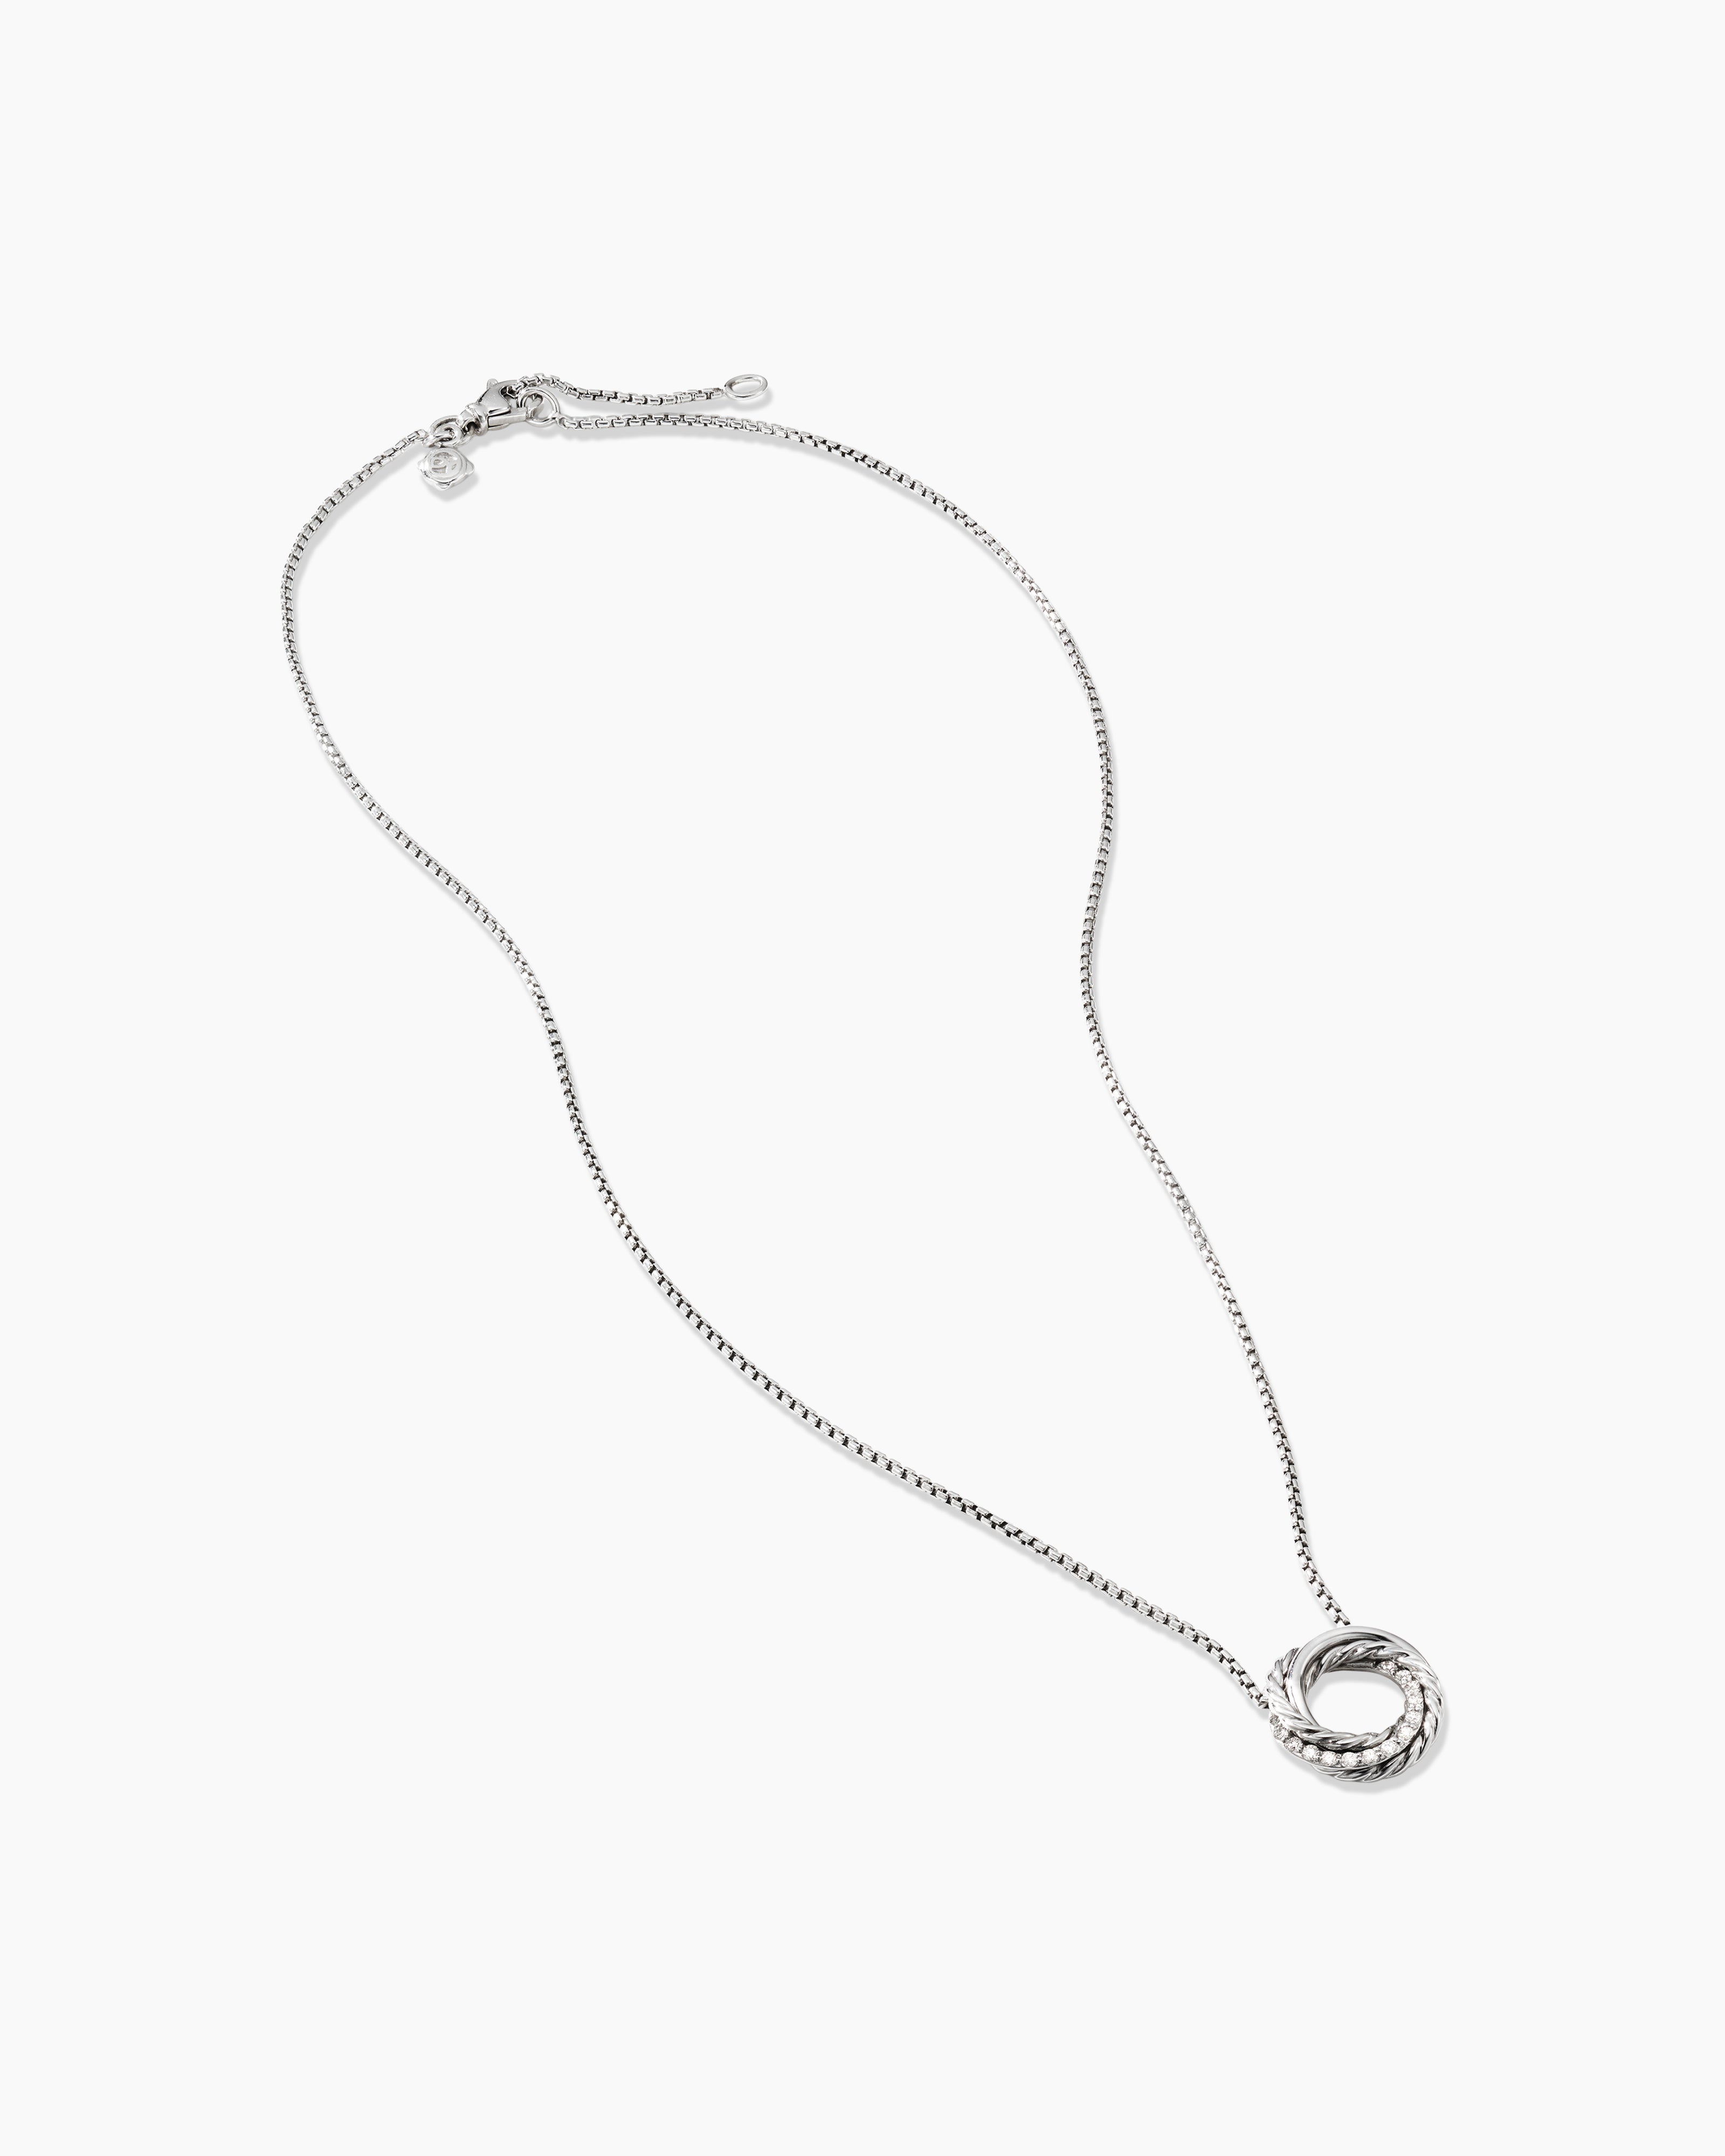 Pre-Owned David Yurman Crossover Necklace | STORE 5a Luxury Preowned Goods